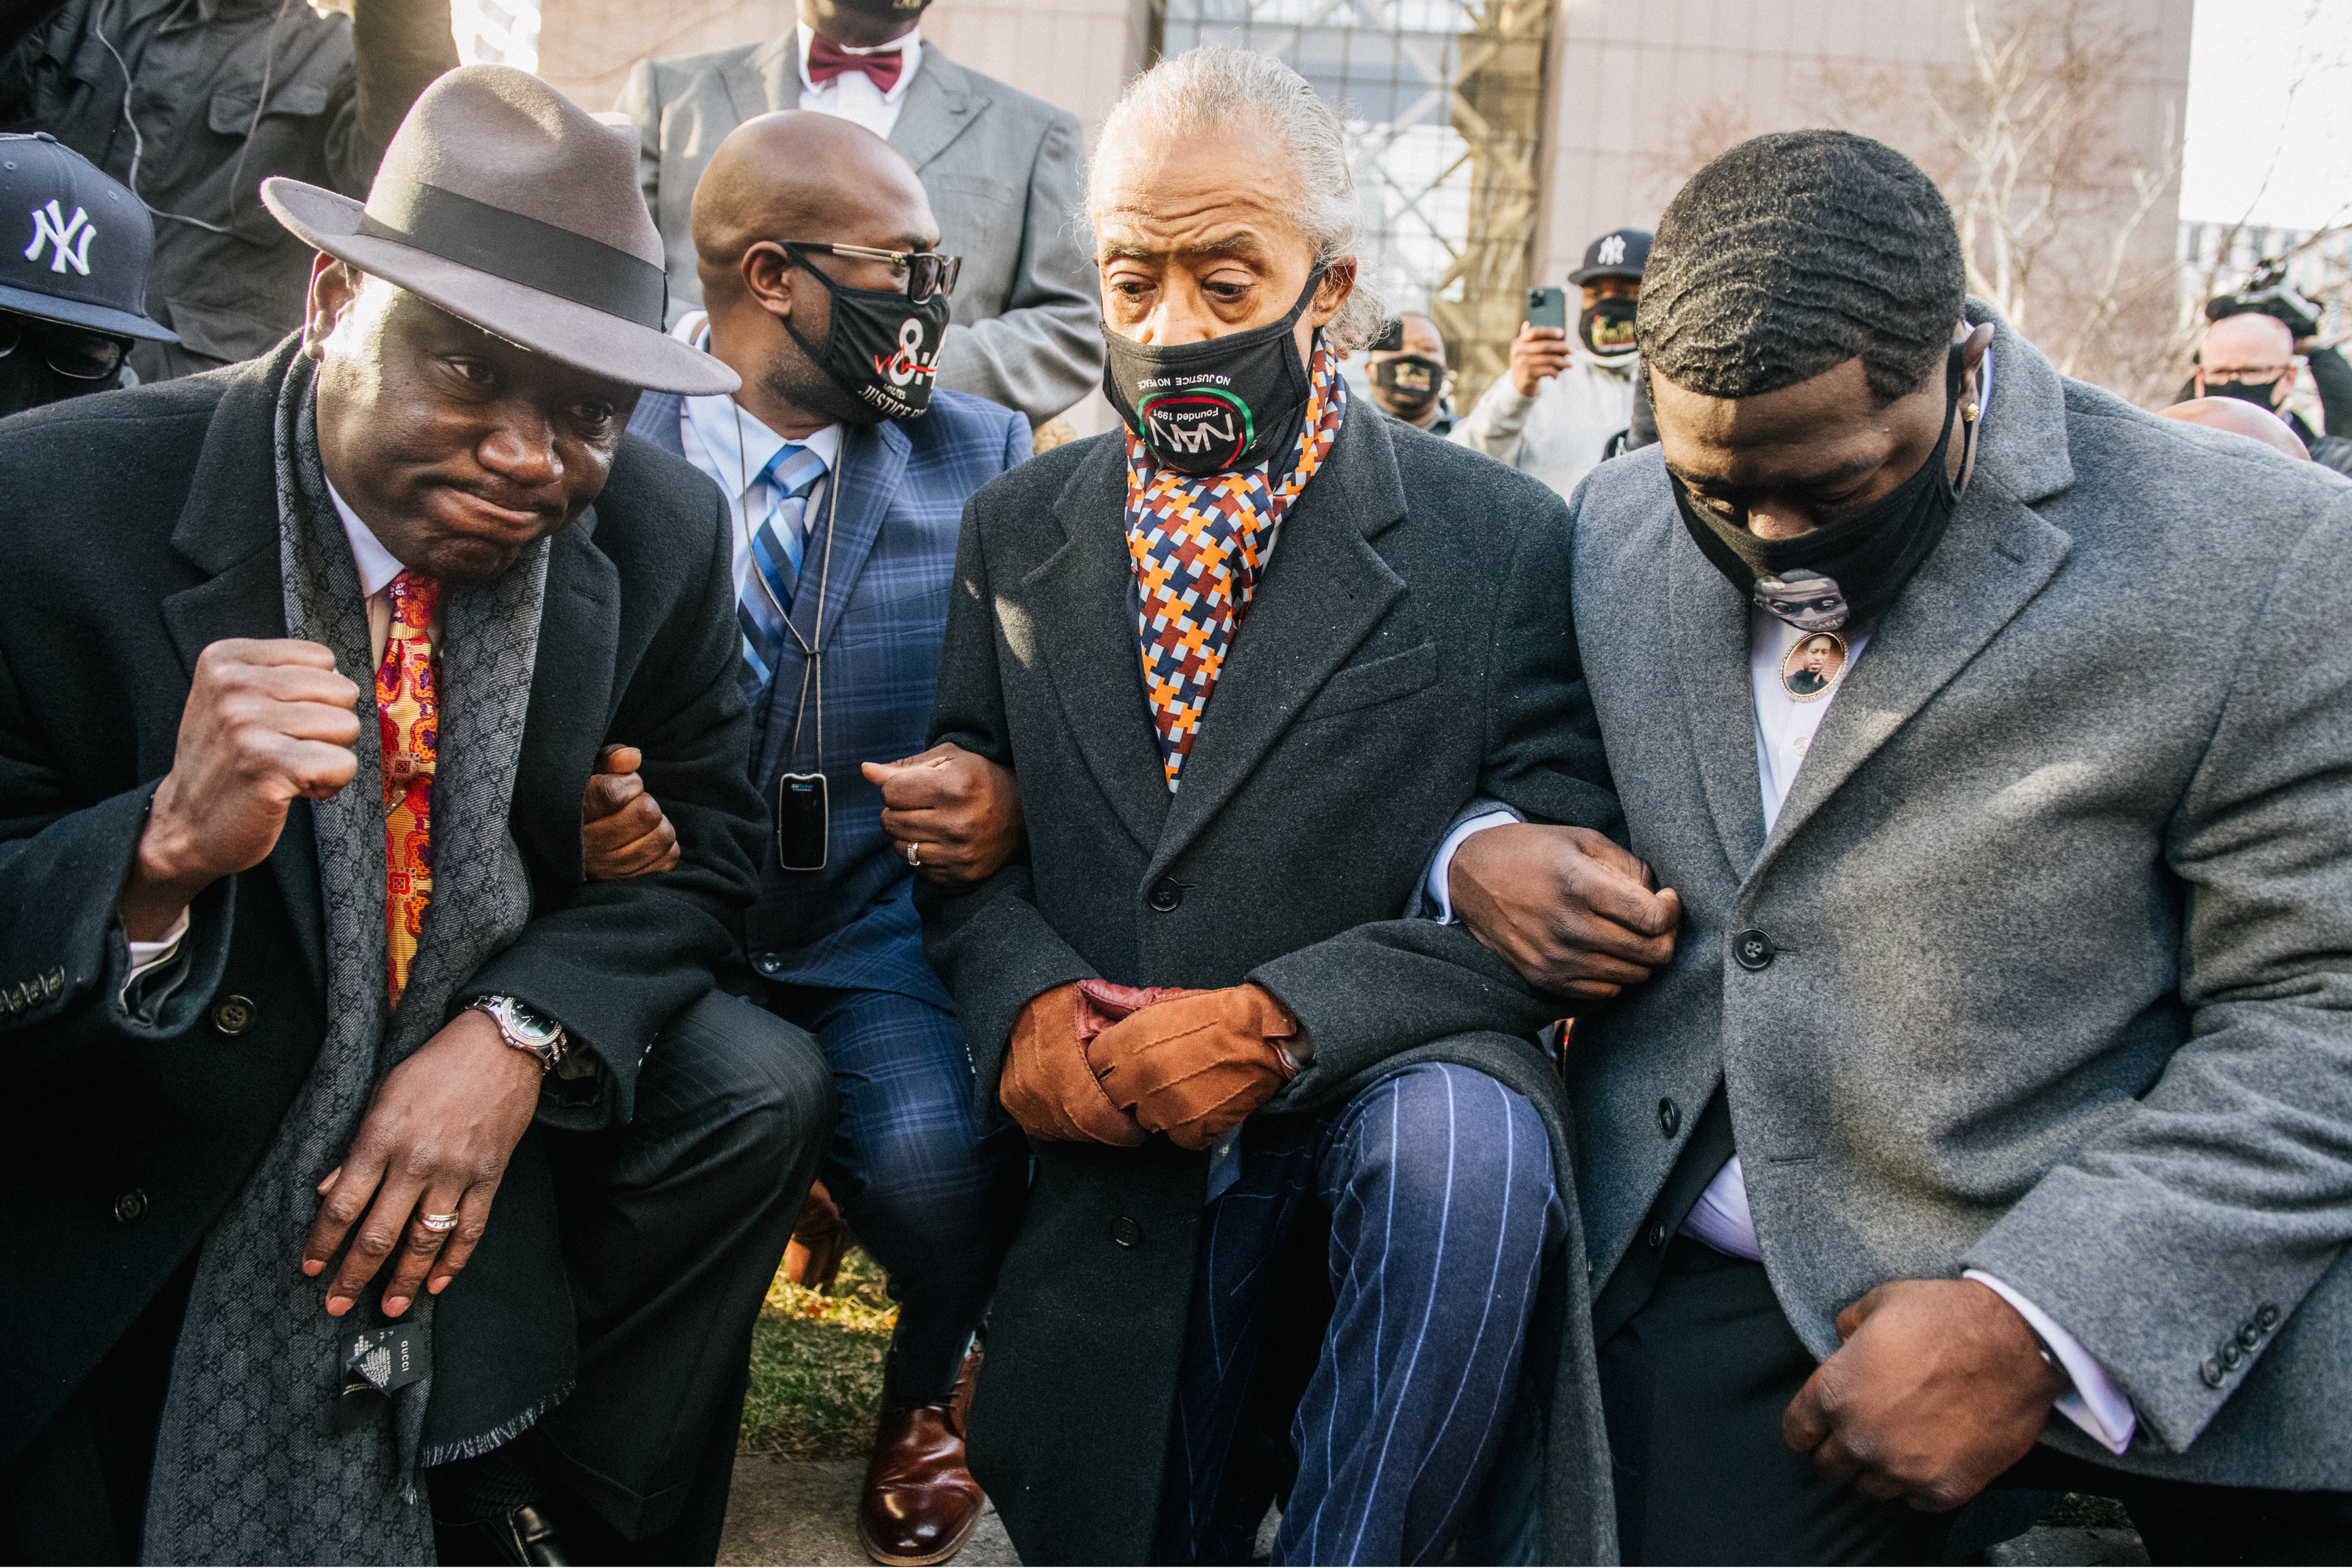 Attorney Ben Crump (L), Rev. Al Sharpton (center) and relatives of George Floyd kneel during a news conference on March 29, 2021 in Minneapolis, Minn., before opening statements in the trial of Derek Chauvin (Brandon Bell—Getty Images)